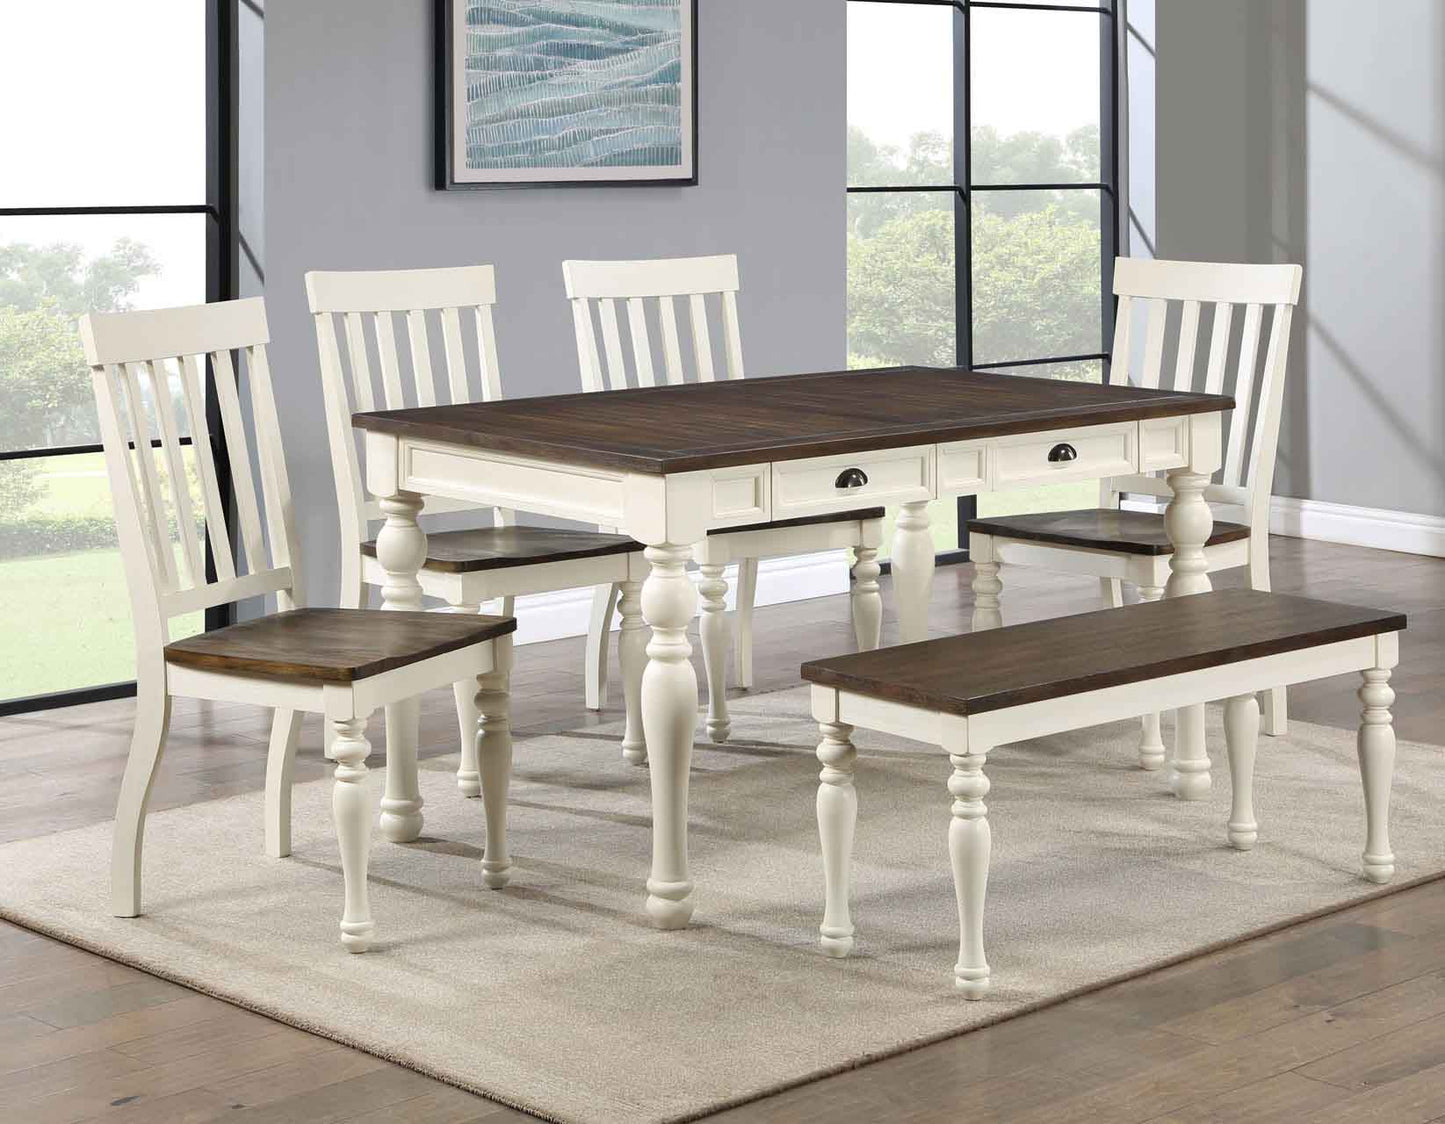 Joanna Two-Tone 4-Drawer Dining Table by Steve Silver